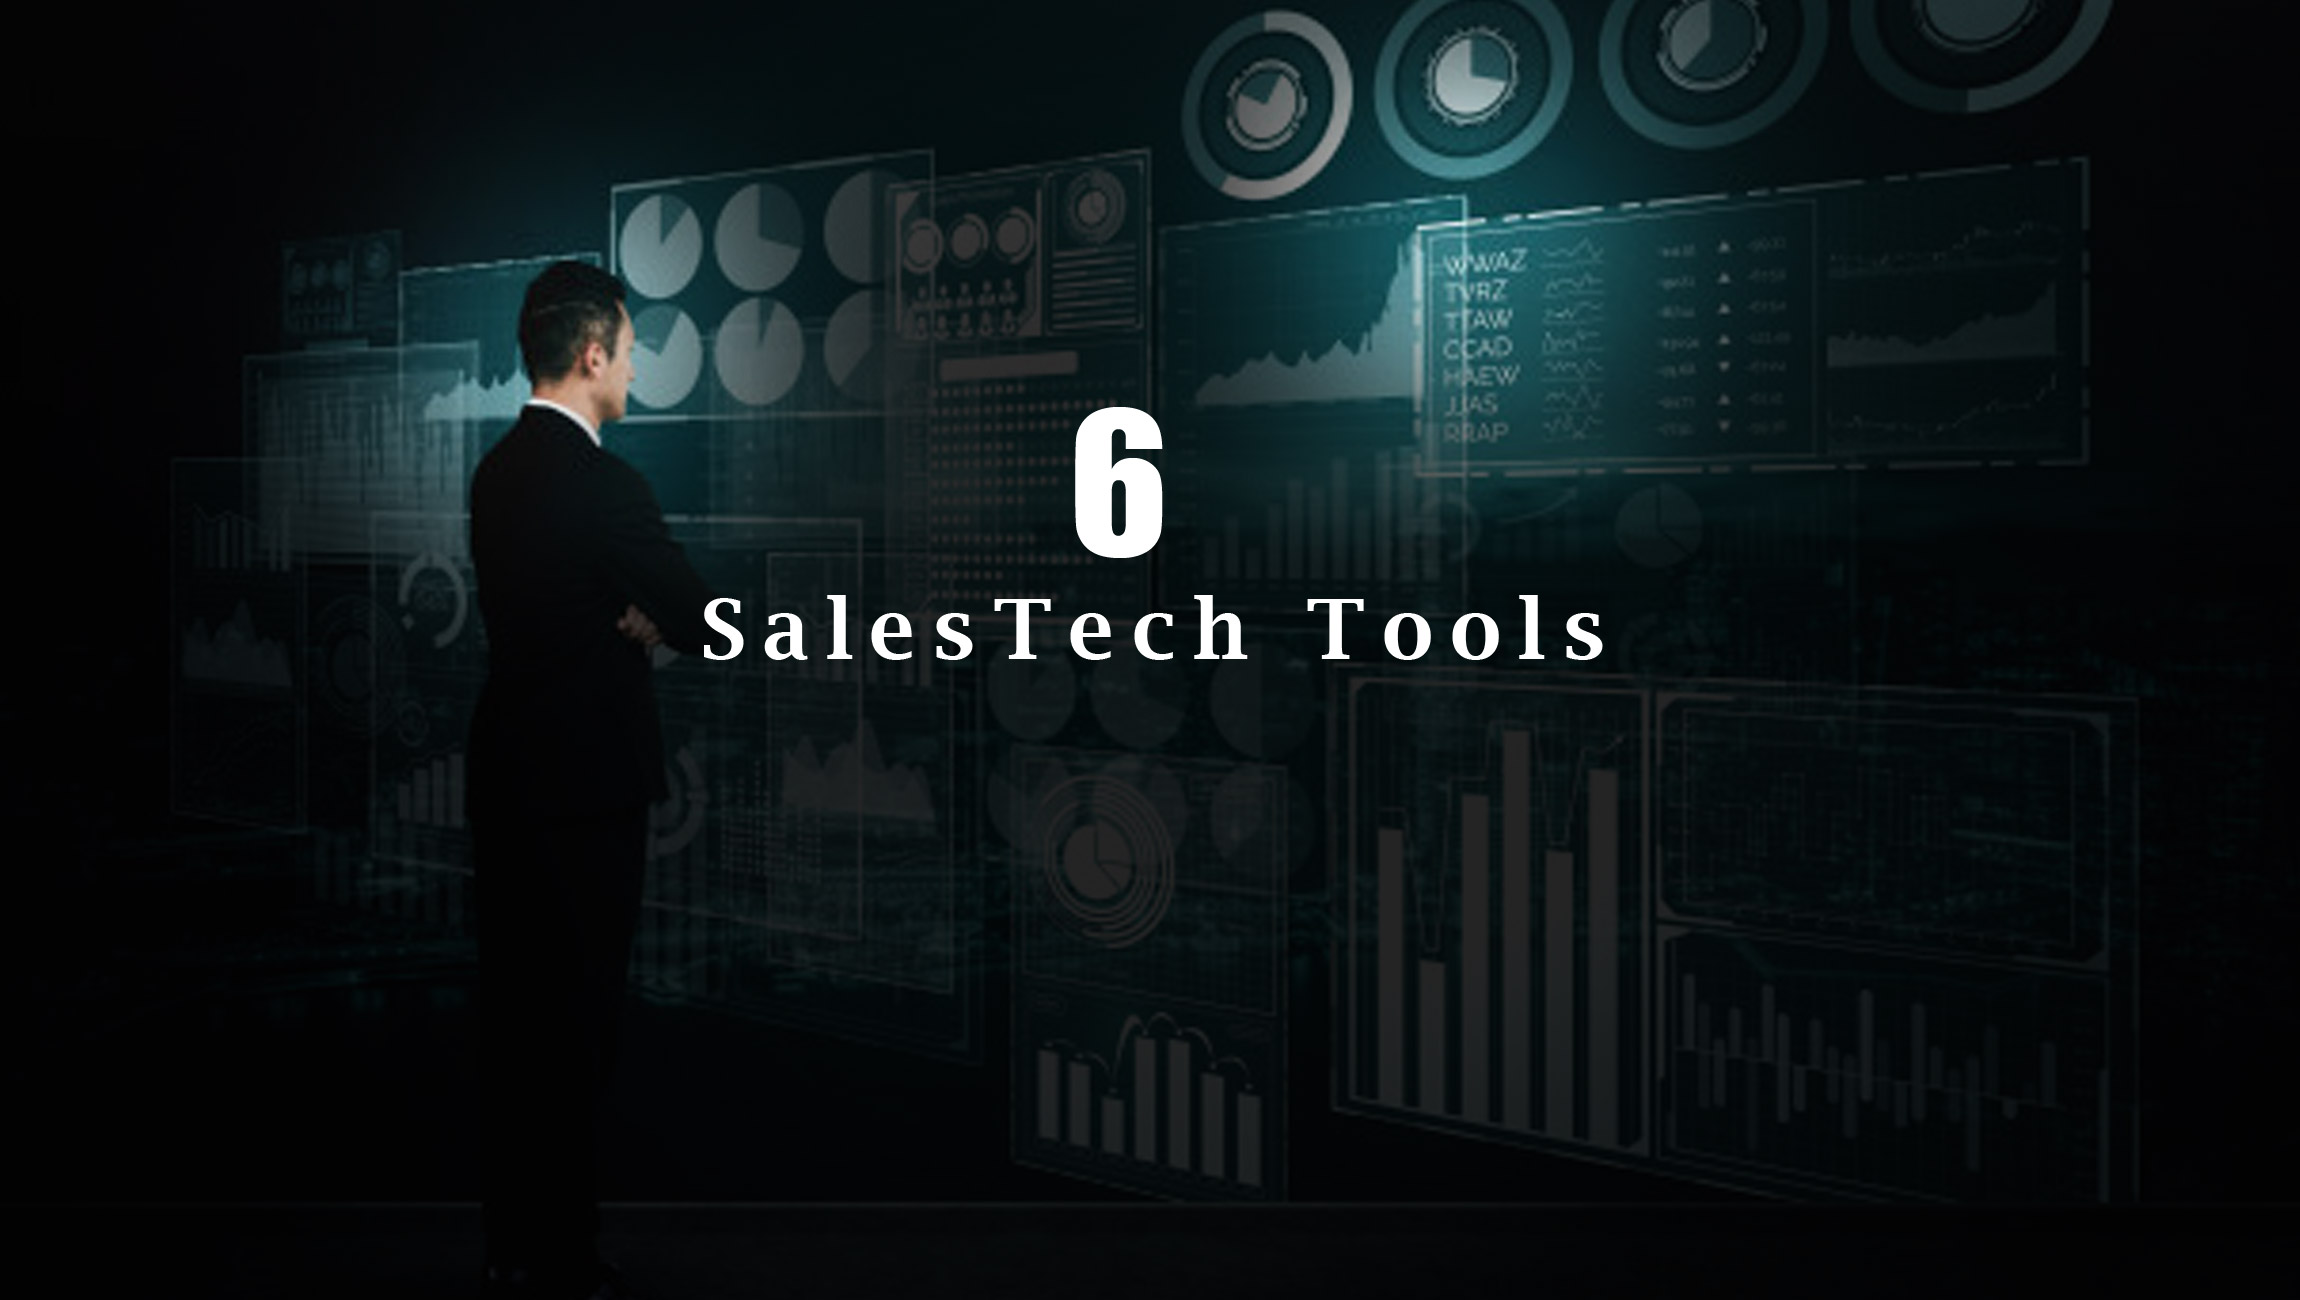 Six SalesTech Tools That Can Help Reduce Friction Between Marketing and Sales